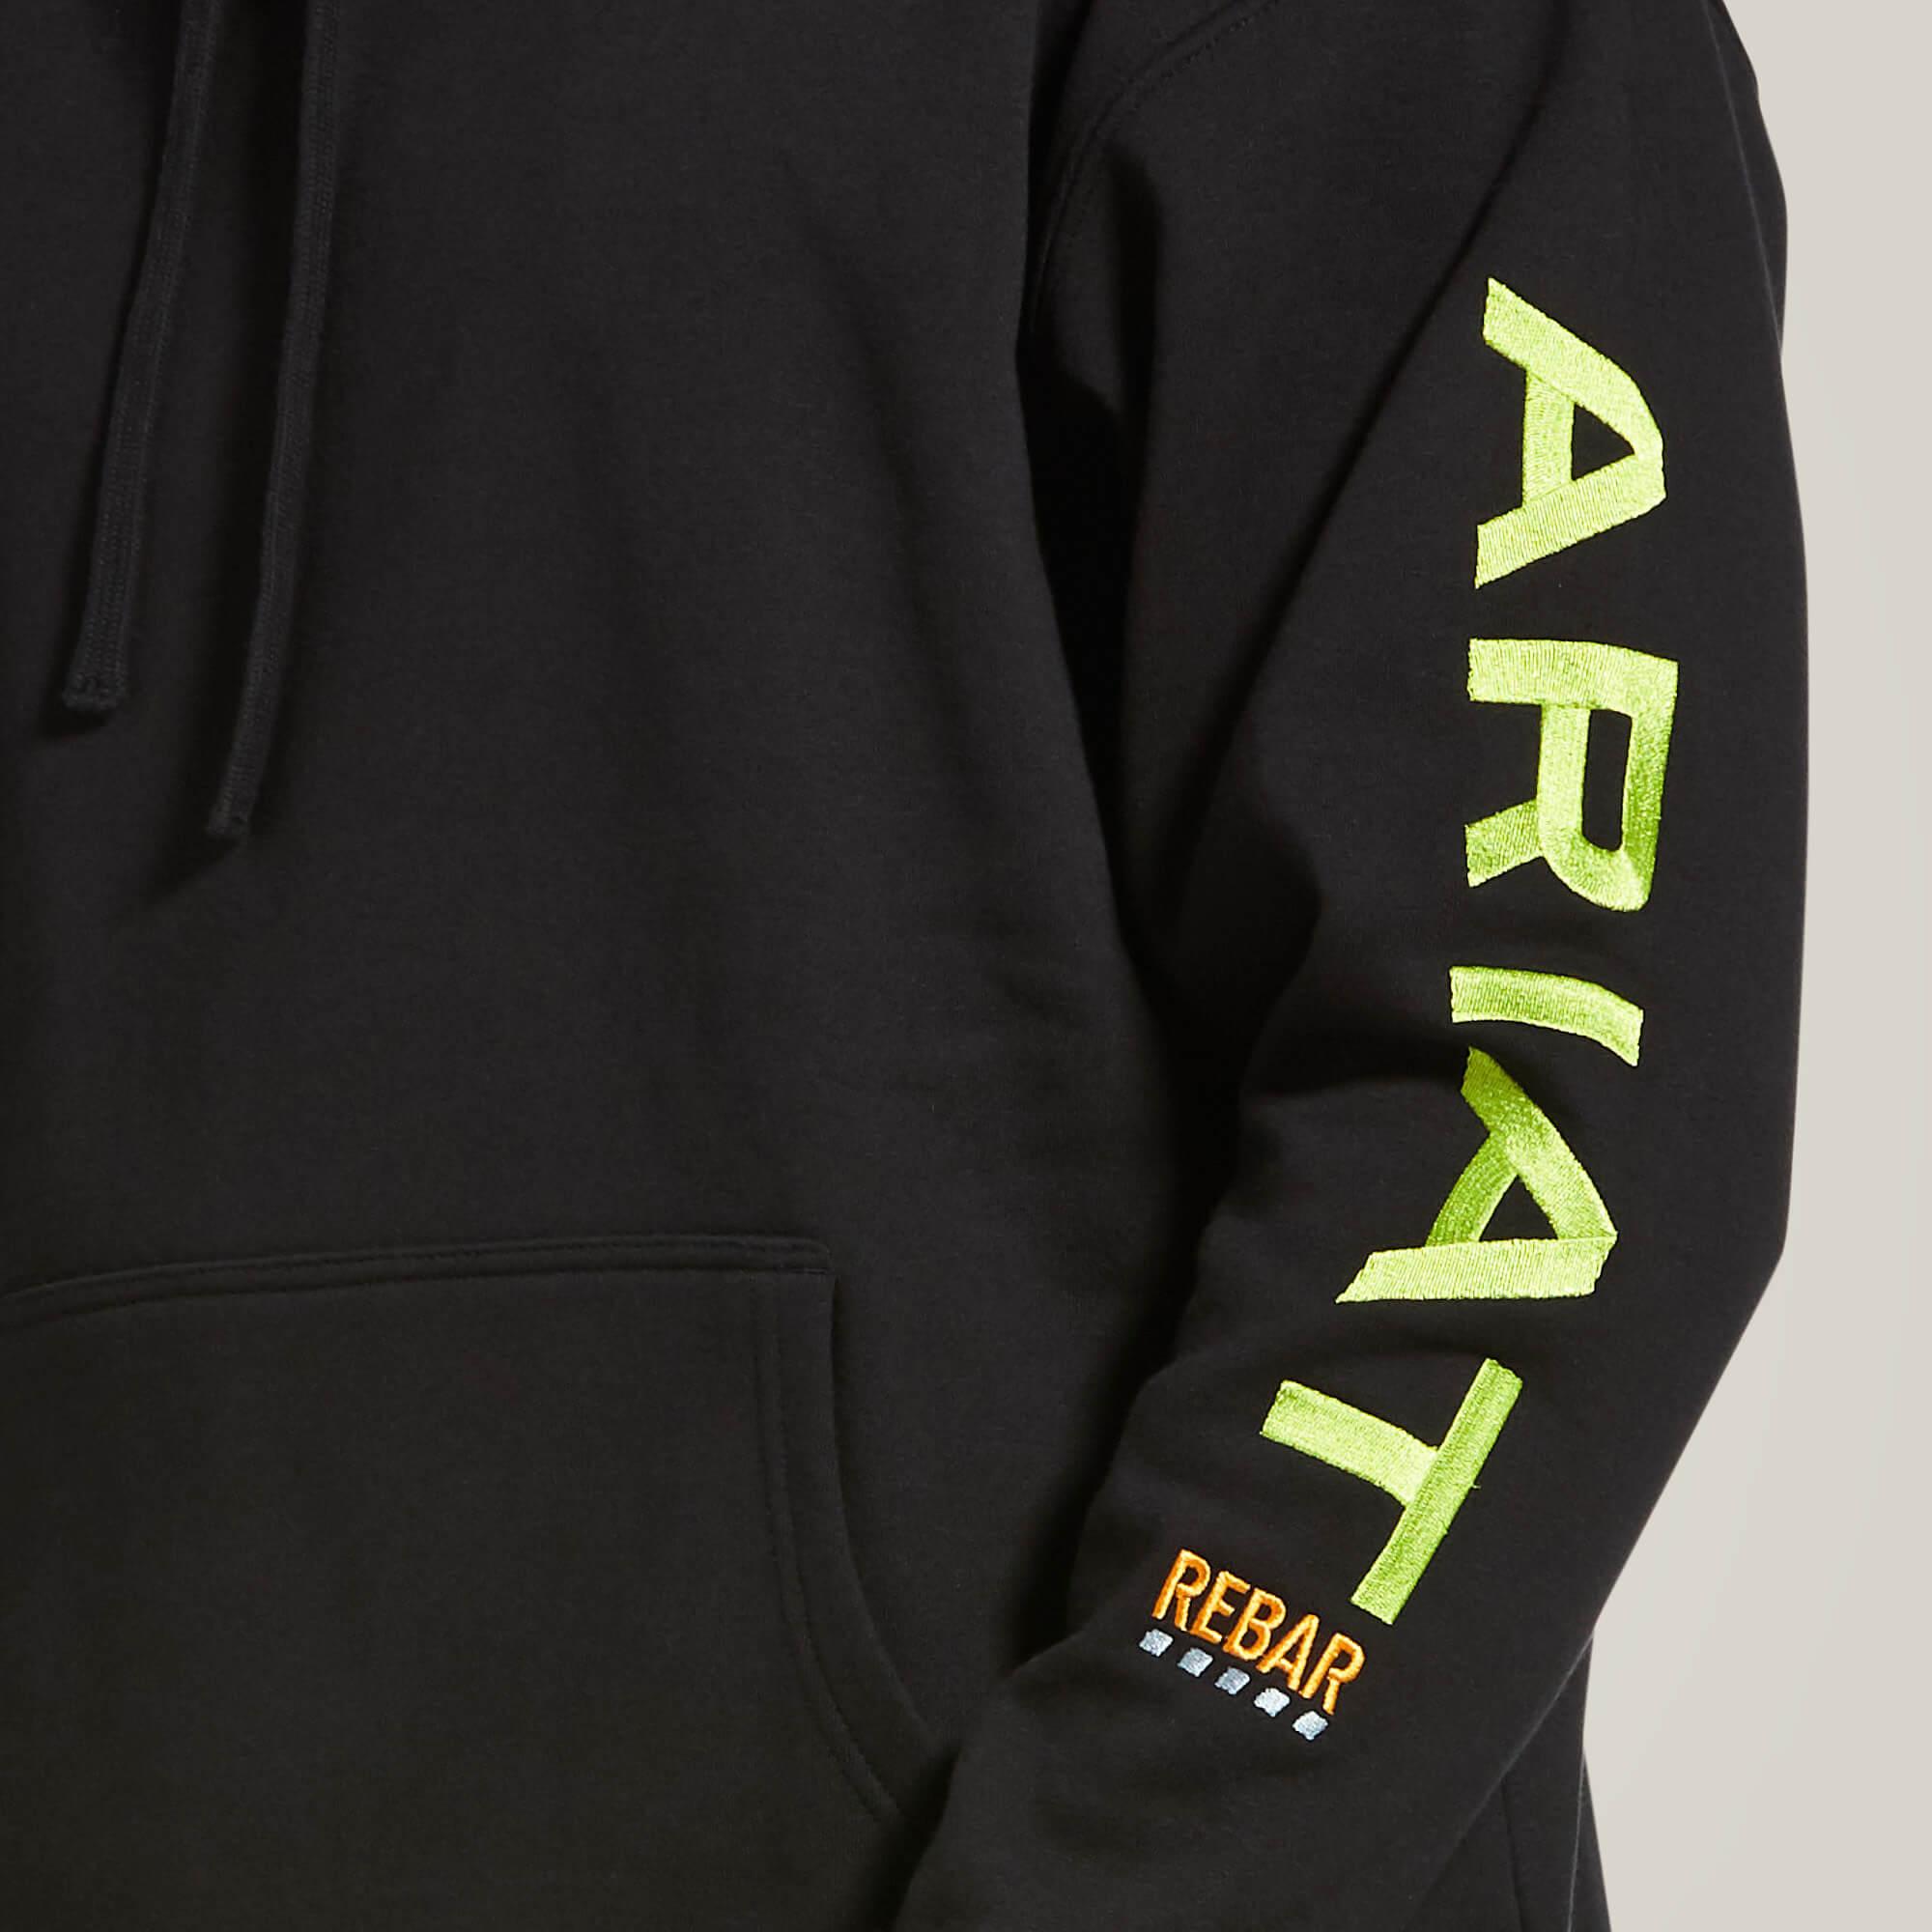 Rebar Graphic Hoodie - Black / Lime - Purpose-Built / Home of the Trades